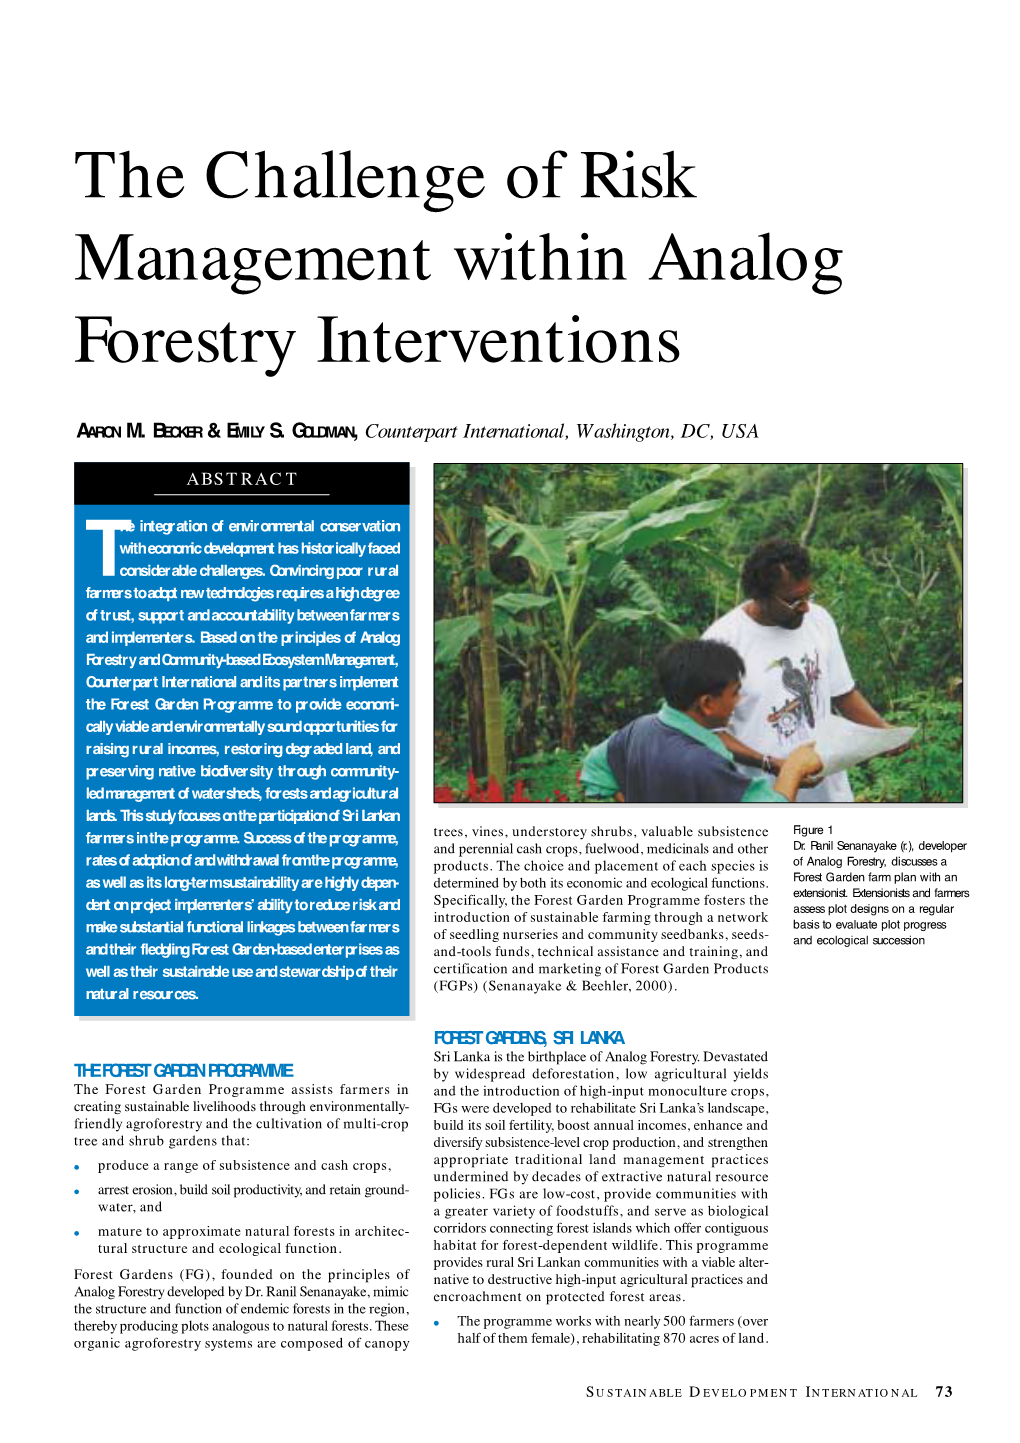 Risk Management and Analog Forestry